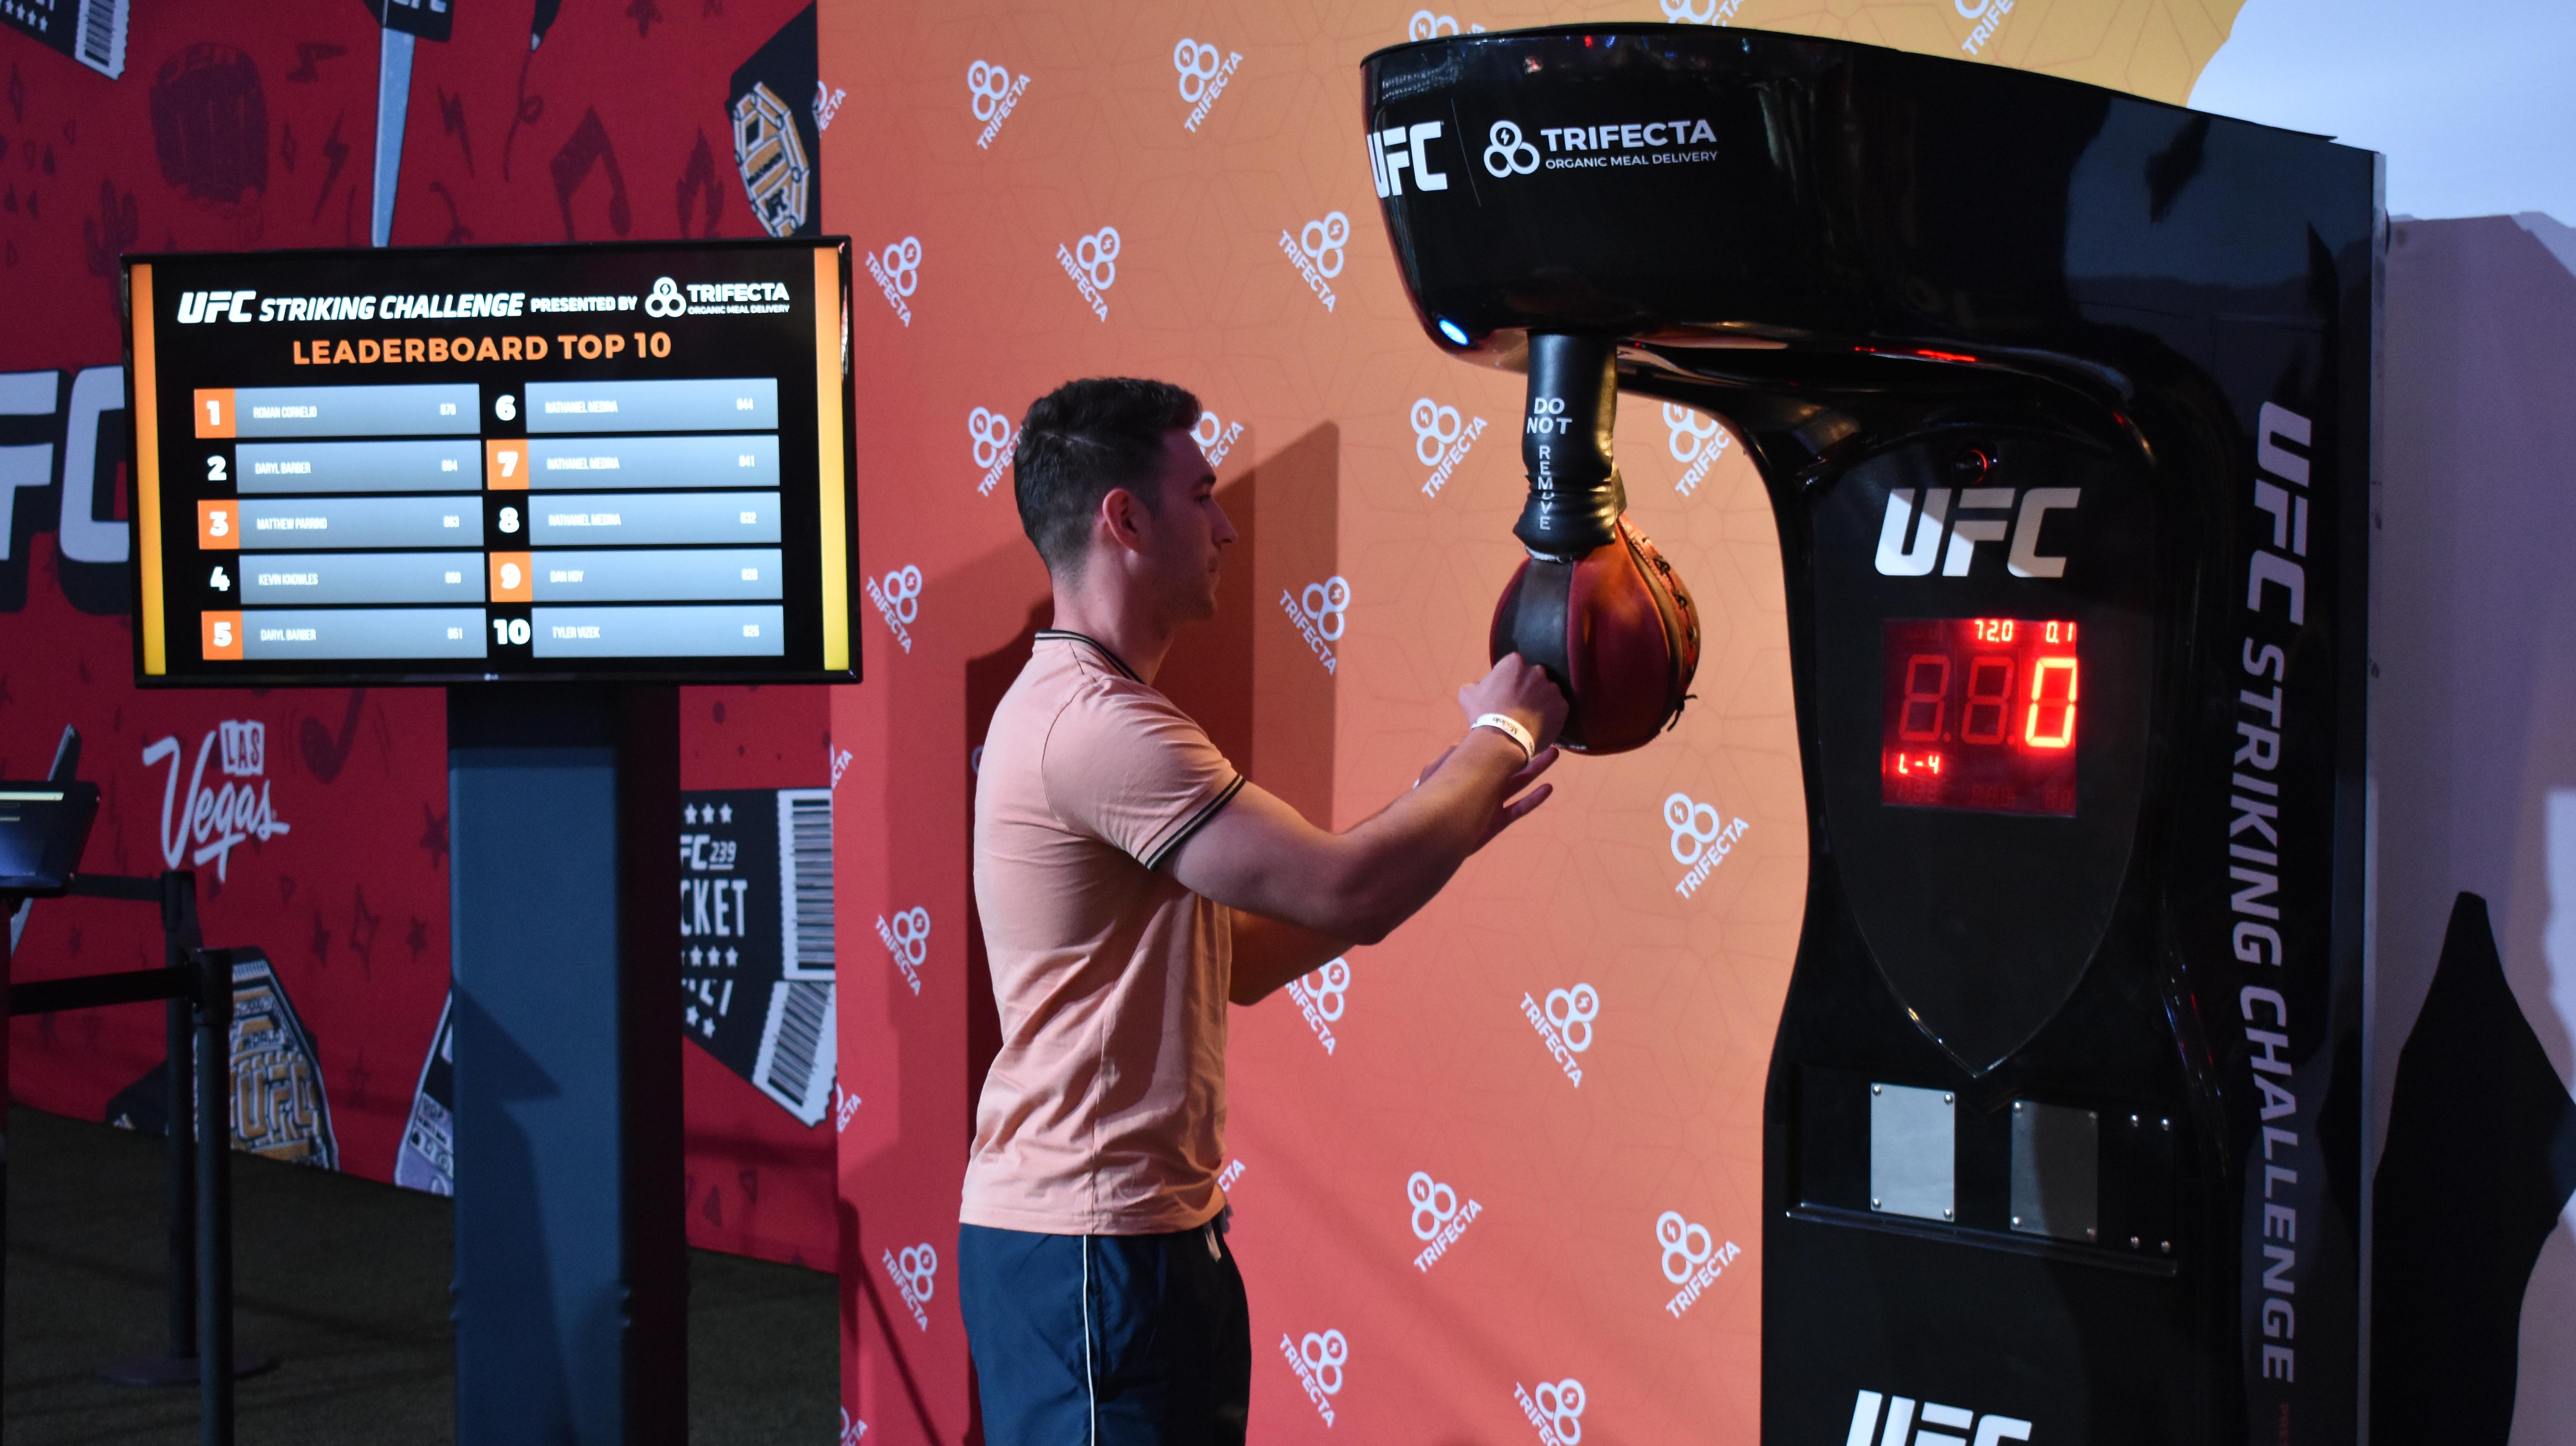 UFC Fan Experience The SpokesmanReview